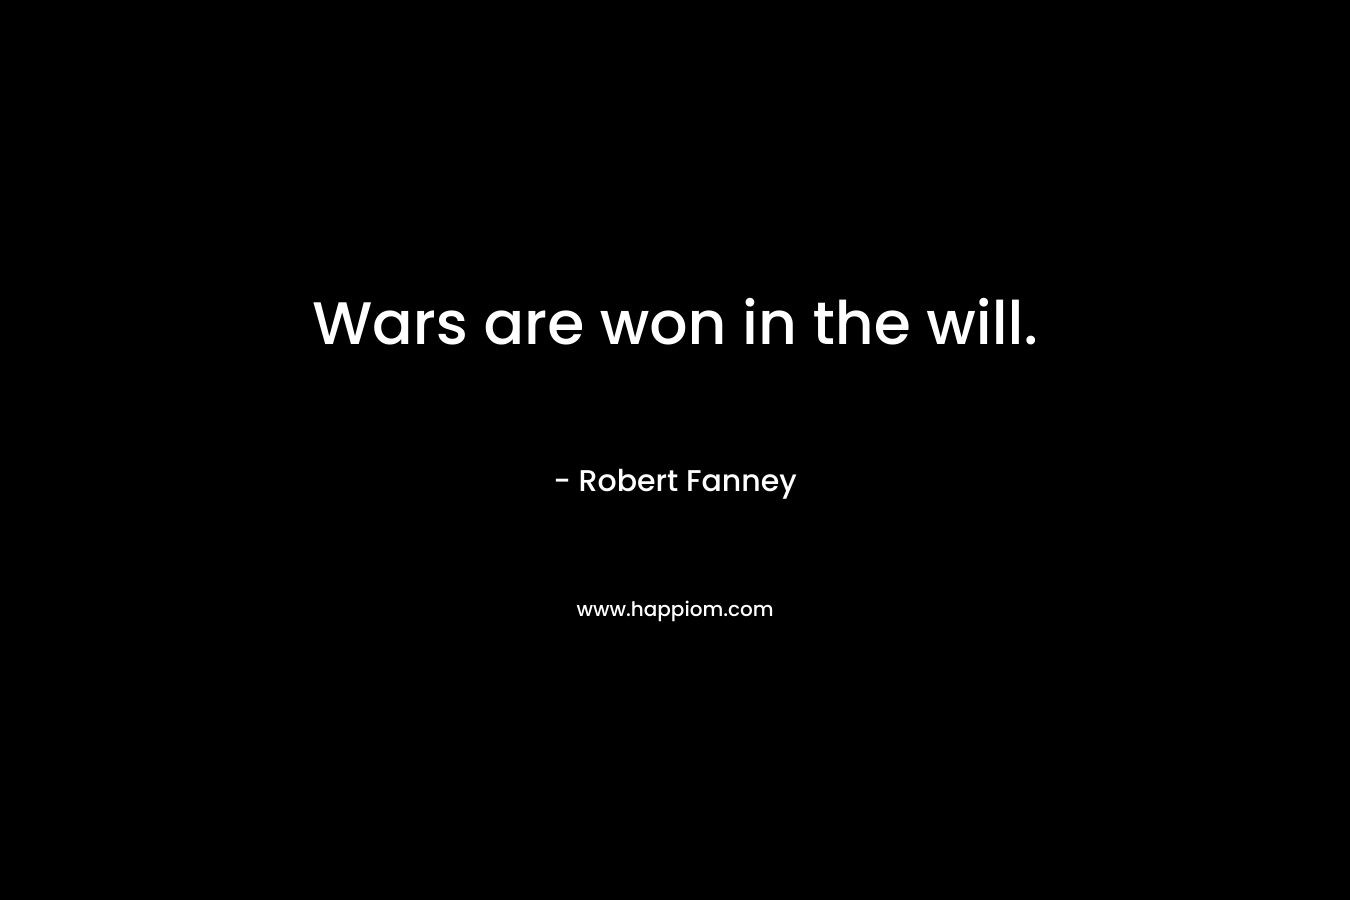 Wars are won in the will. – Robert Fanney